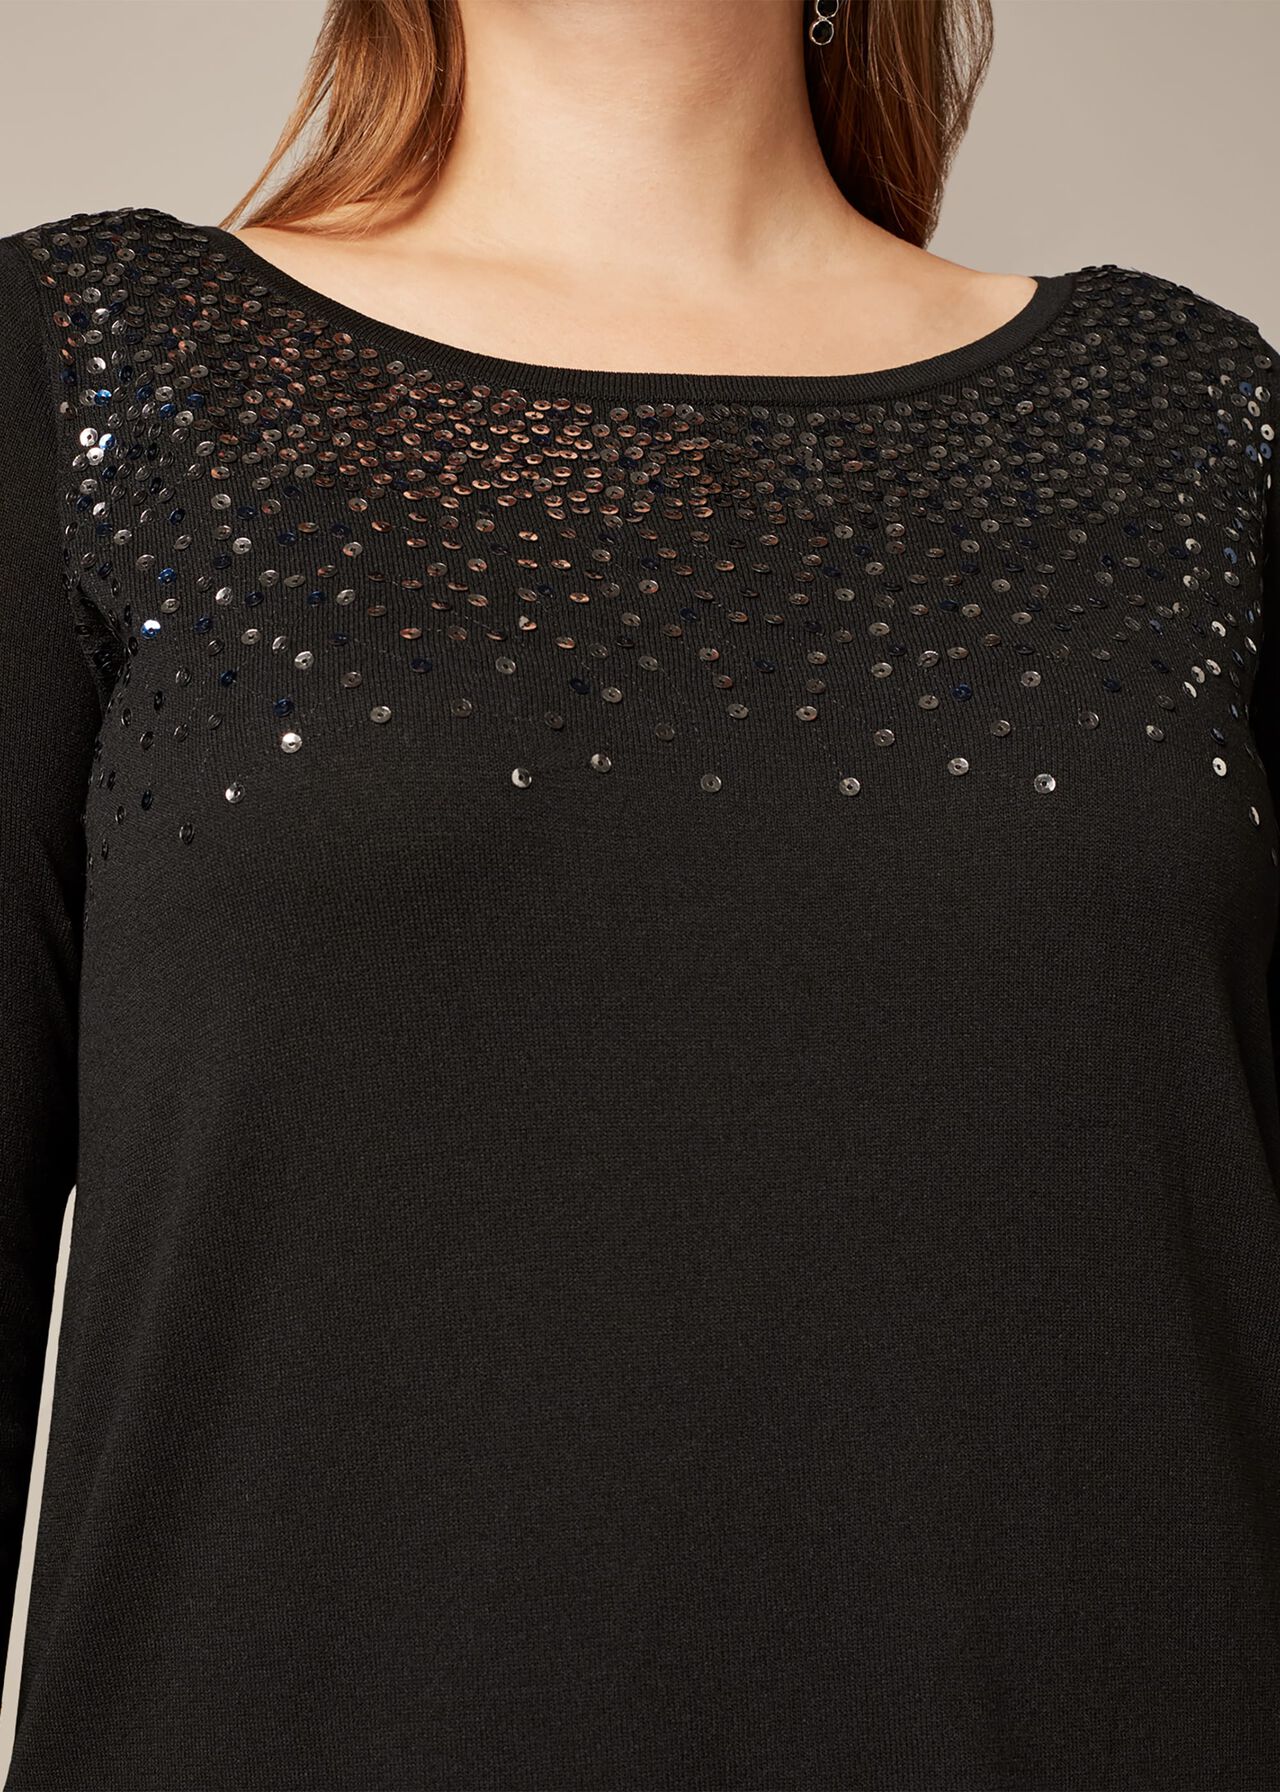 Elly Sequin Knit Top